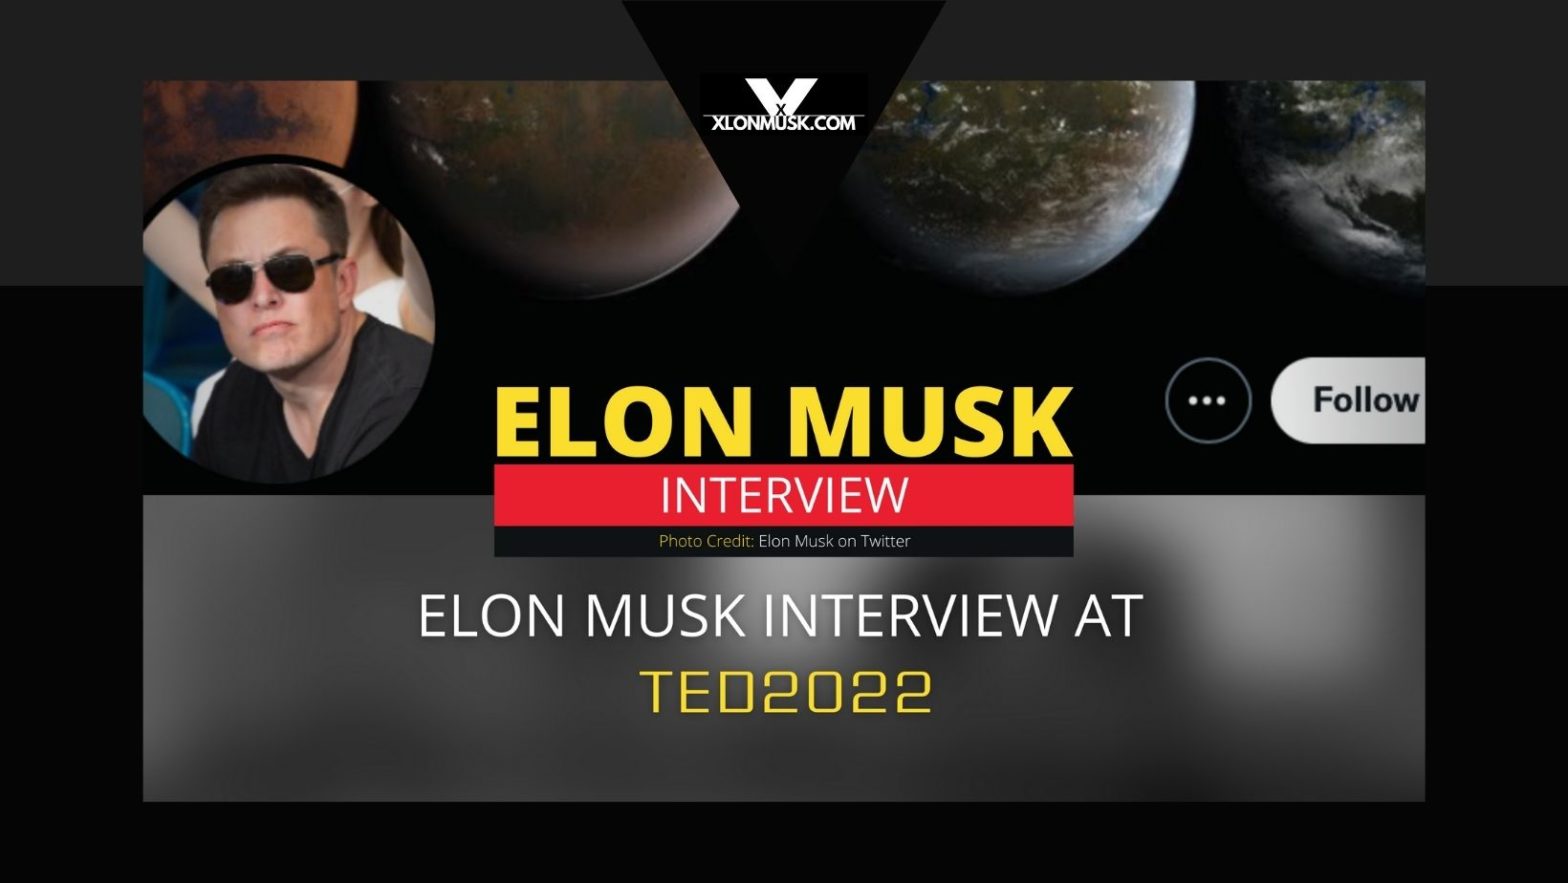 Elon Musk Interview at TED2022